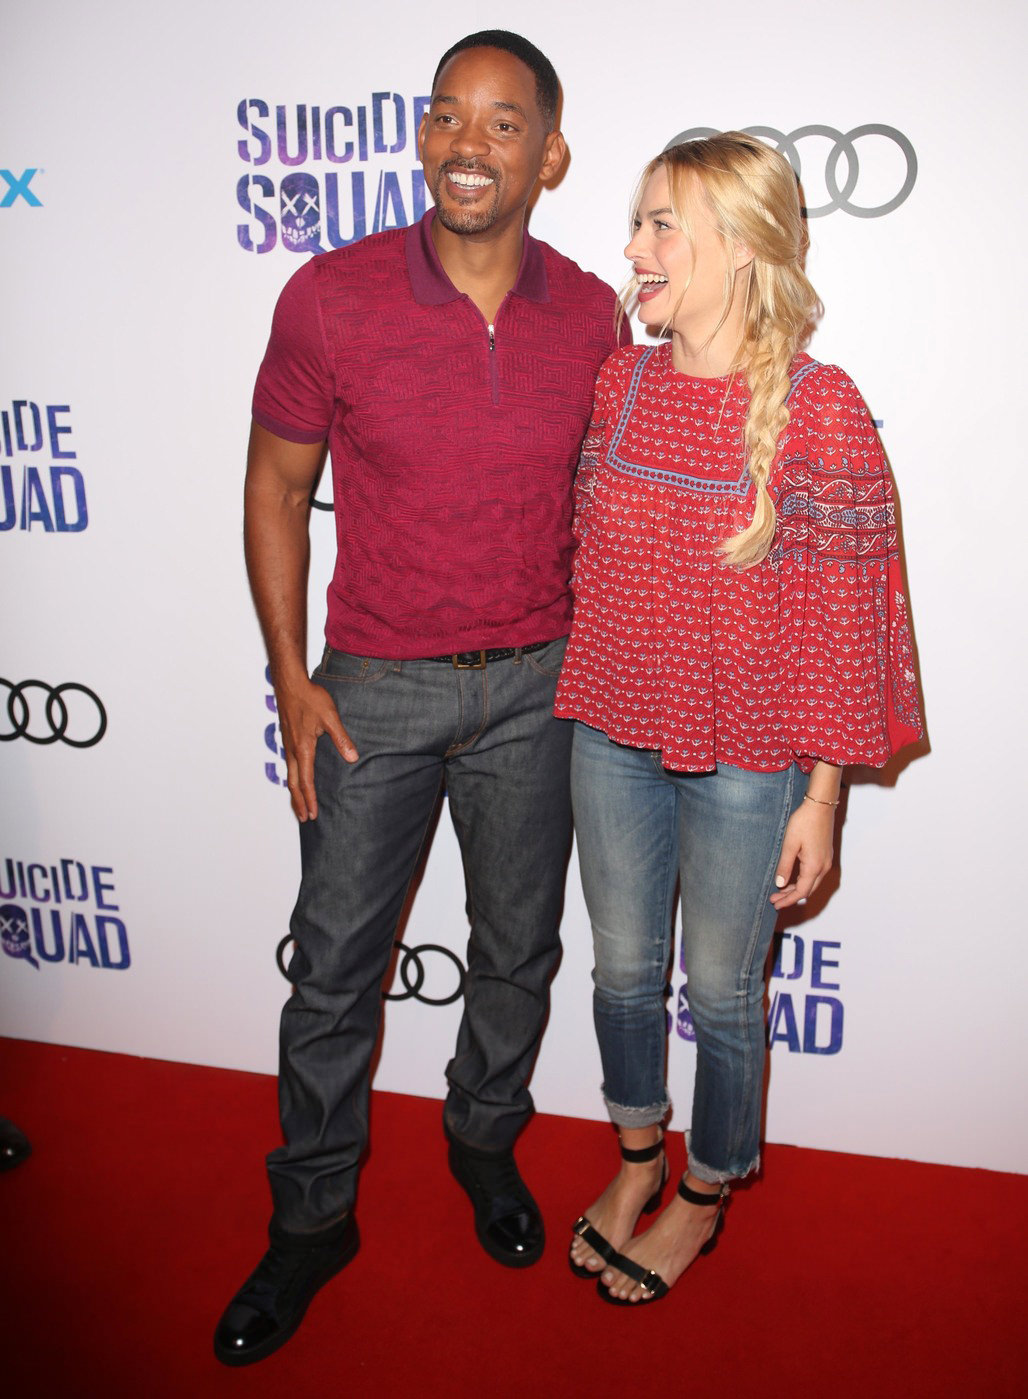 Will-Smith-Margot-Robbie-The-Suicide-Squad-Belle-Reve-Penitentiary-Toronto-Canada-Red-Carpet-Fashion-Tom-Lorenzo-Site (1)